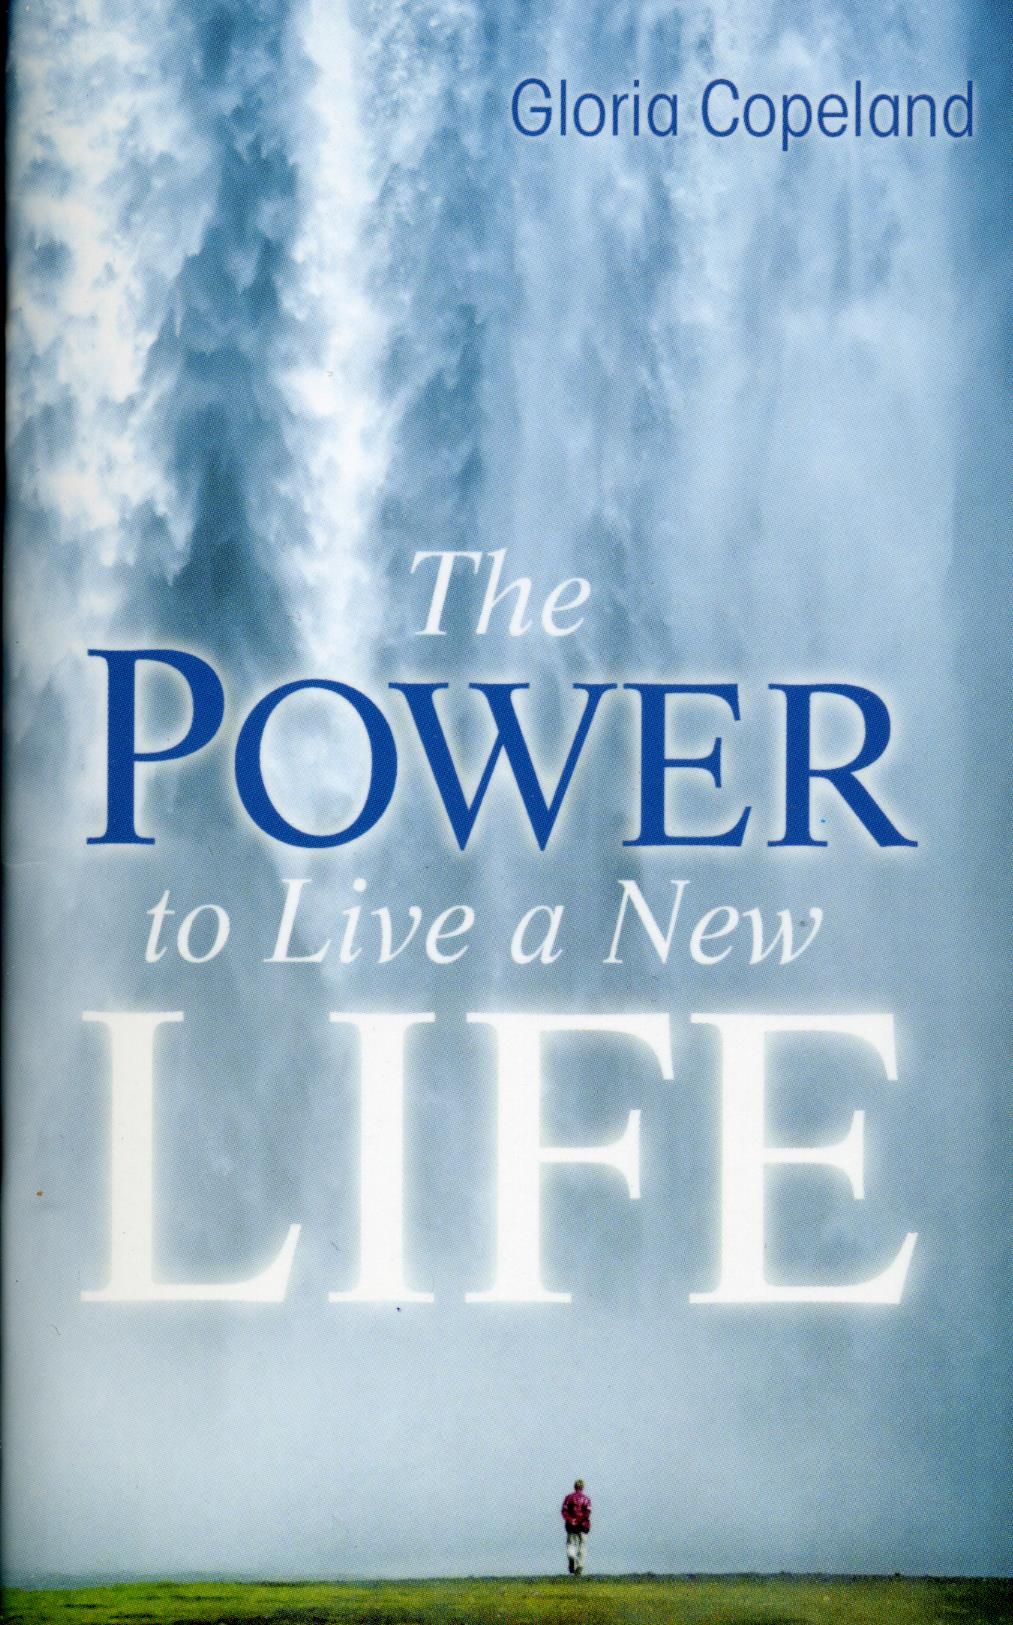 G. Copeland: The Power to live a New Life